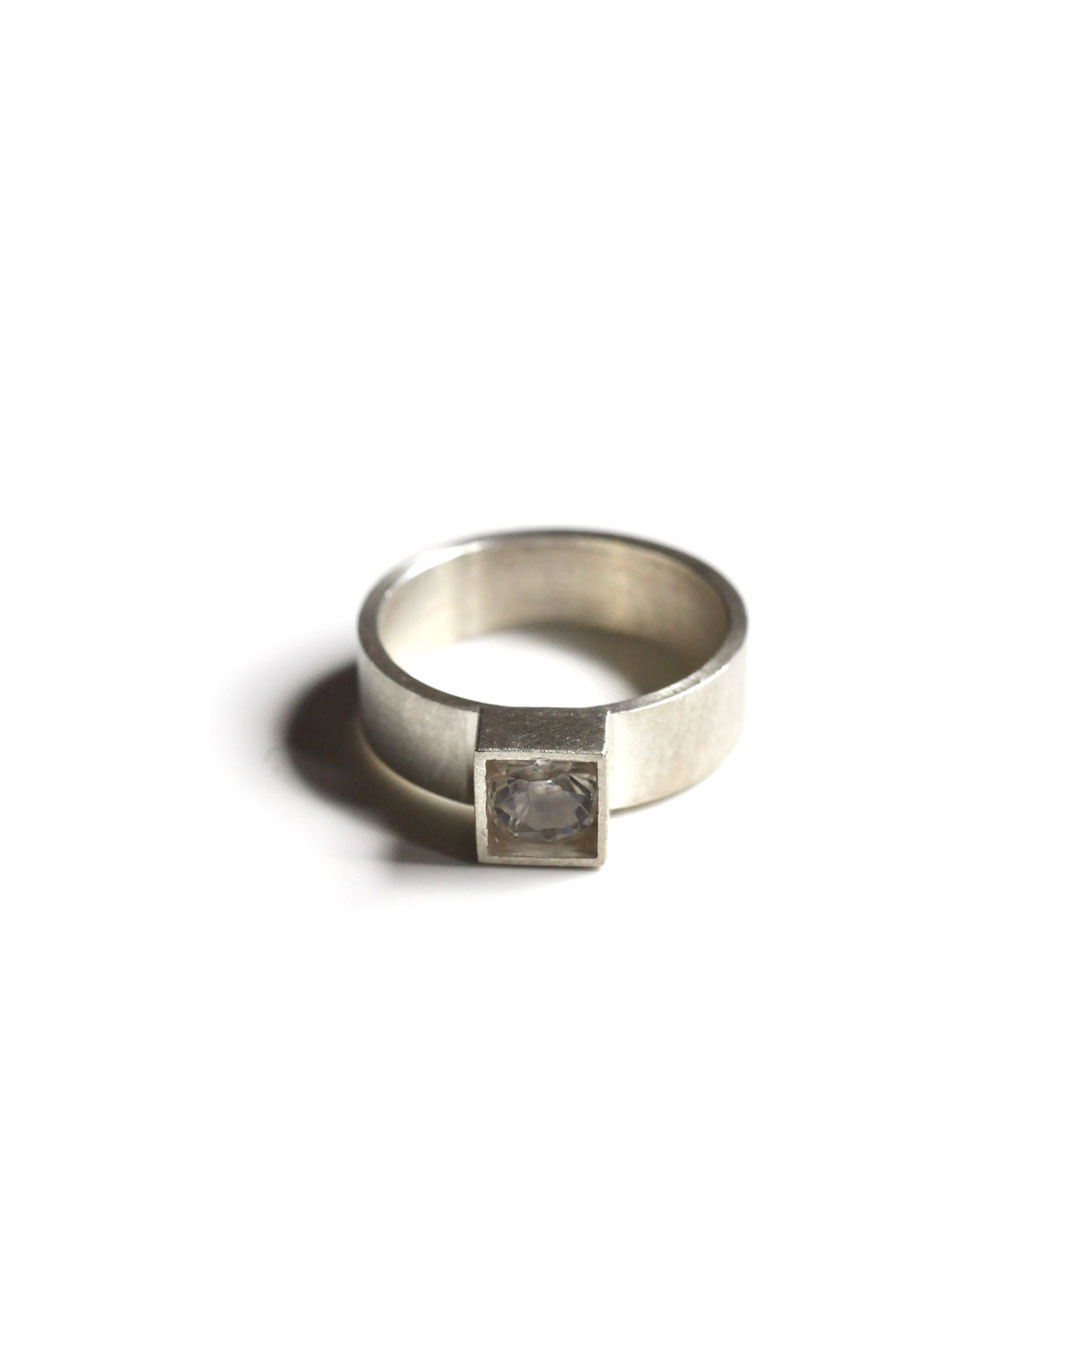 Herman Hermsen, untitled, 2005, ring; silver, synthetic stone, 23 x 19 x 5 mm, €190